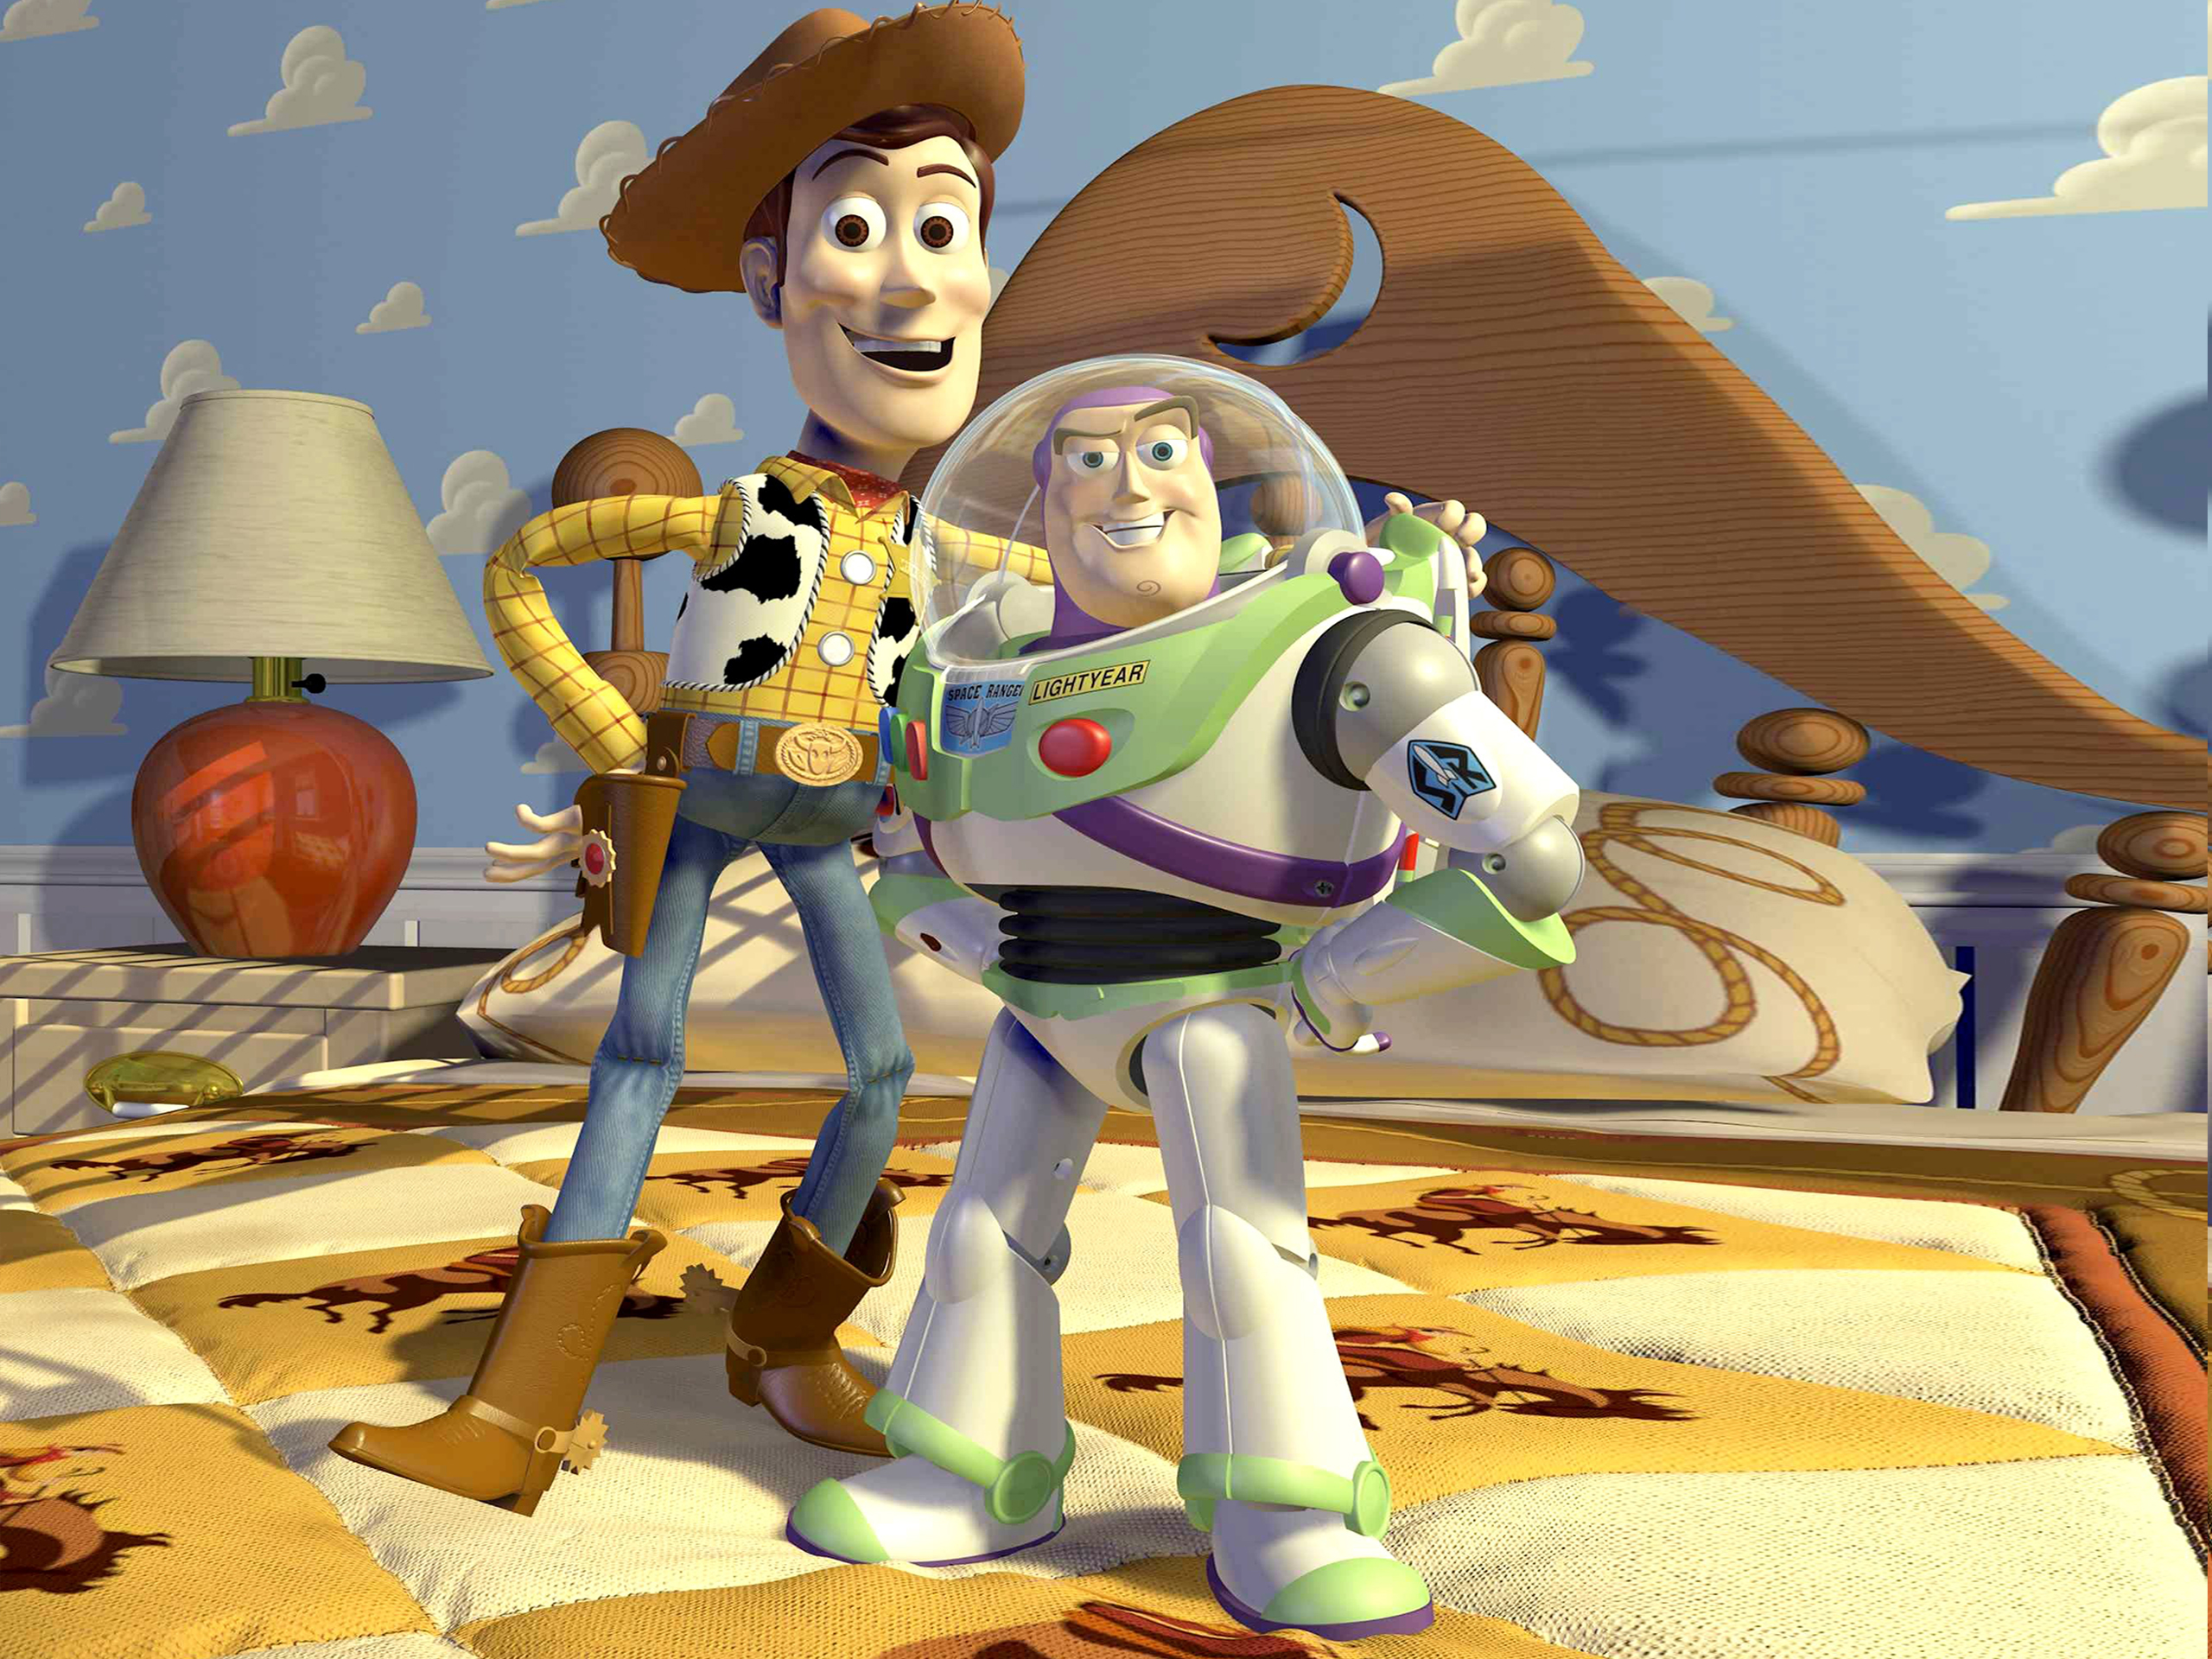 Toy Story 3 | Free Desktop Wallpapers for HD, Widescreen and Mobile